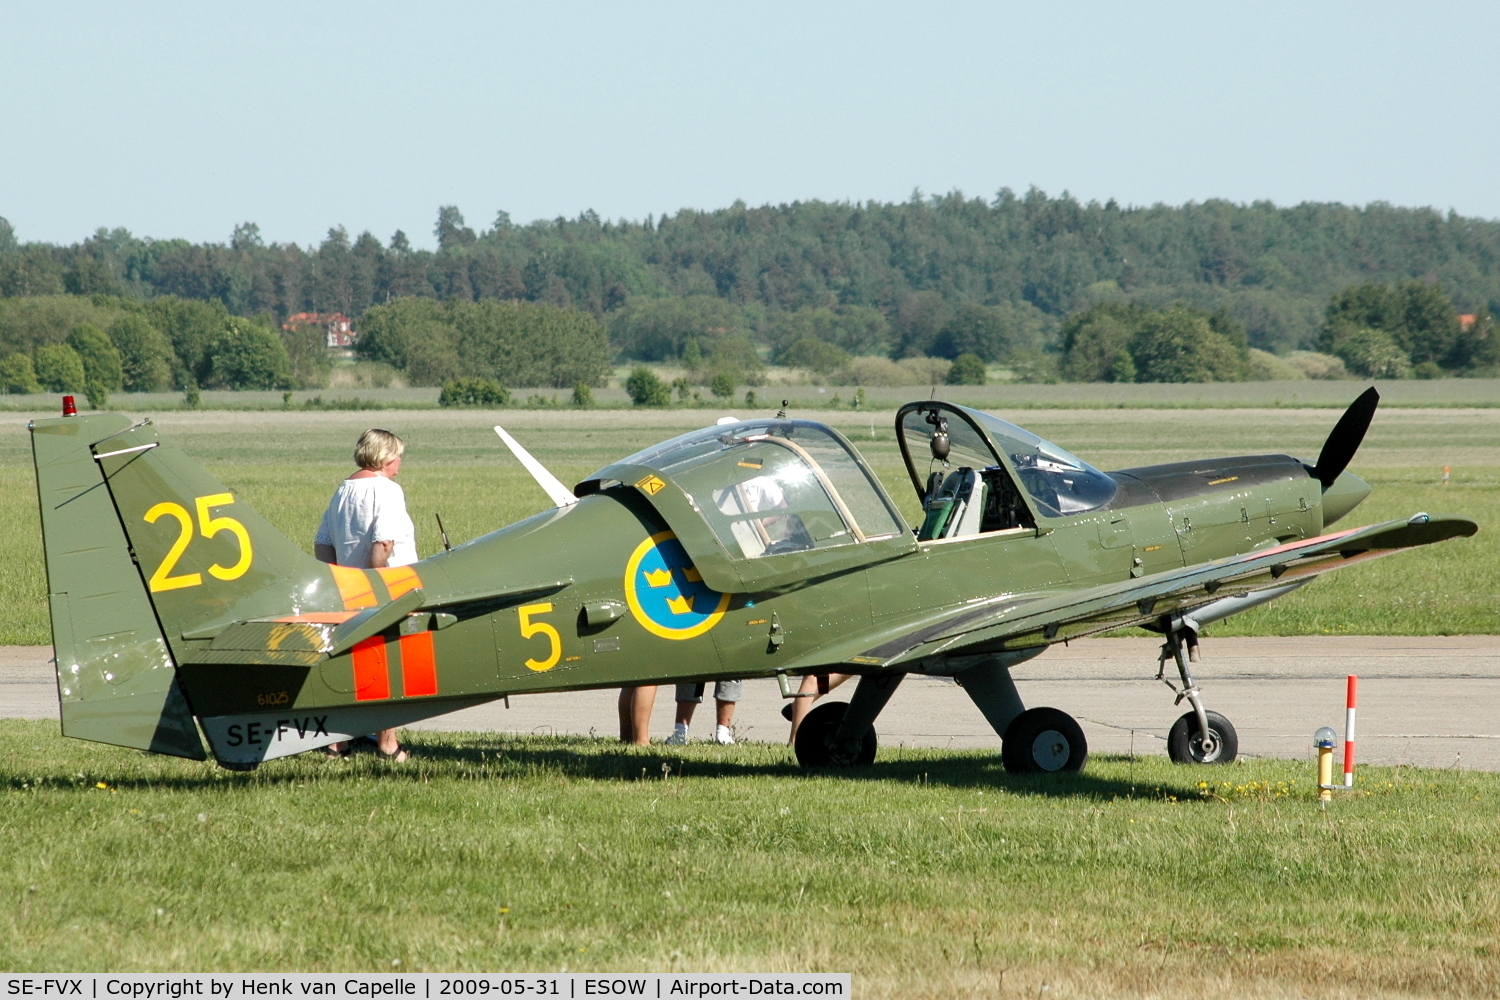 SE-FVX, 1971 Scottish Aviation Sk.61D Bulldog C/N BH100/130, This Bulldog is now part of the Swedish Air Force museum collection.